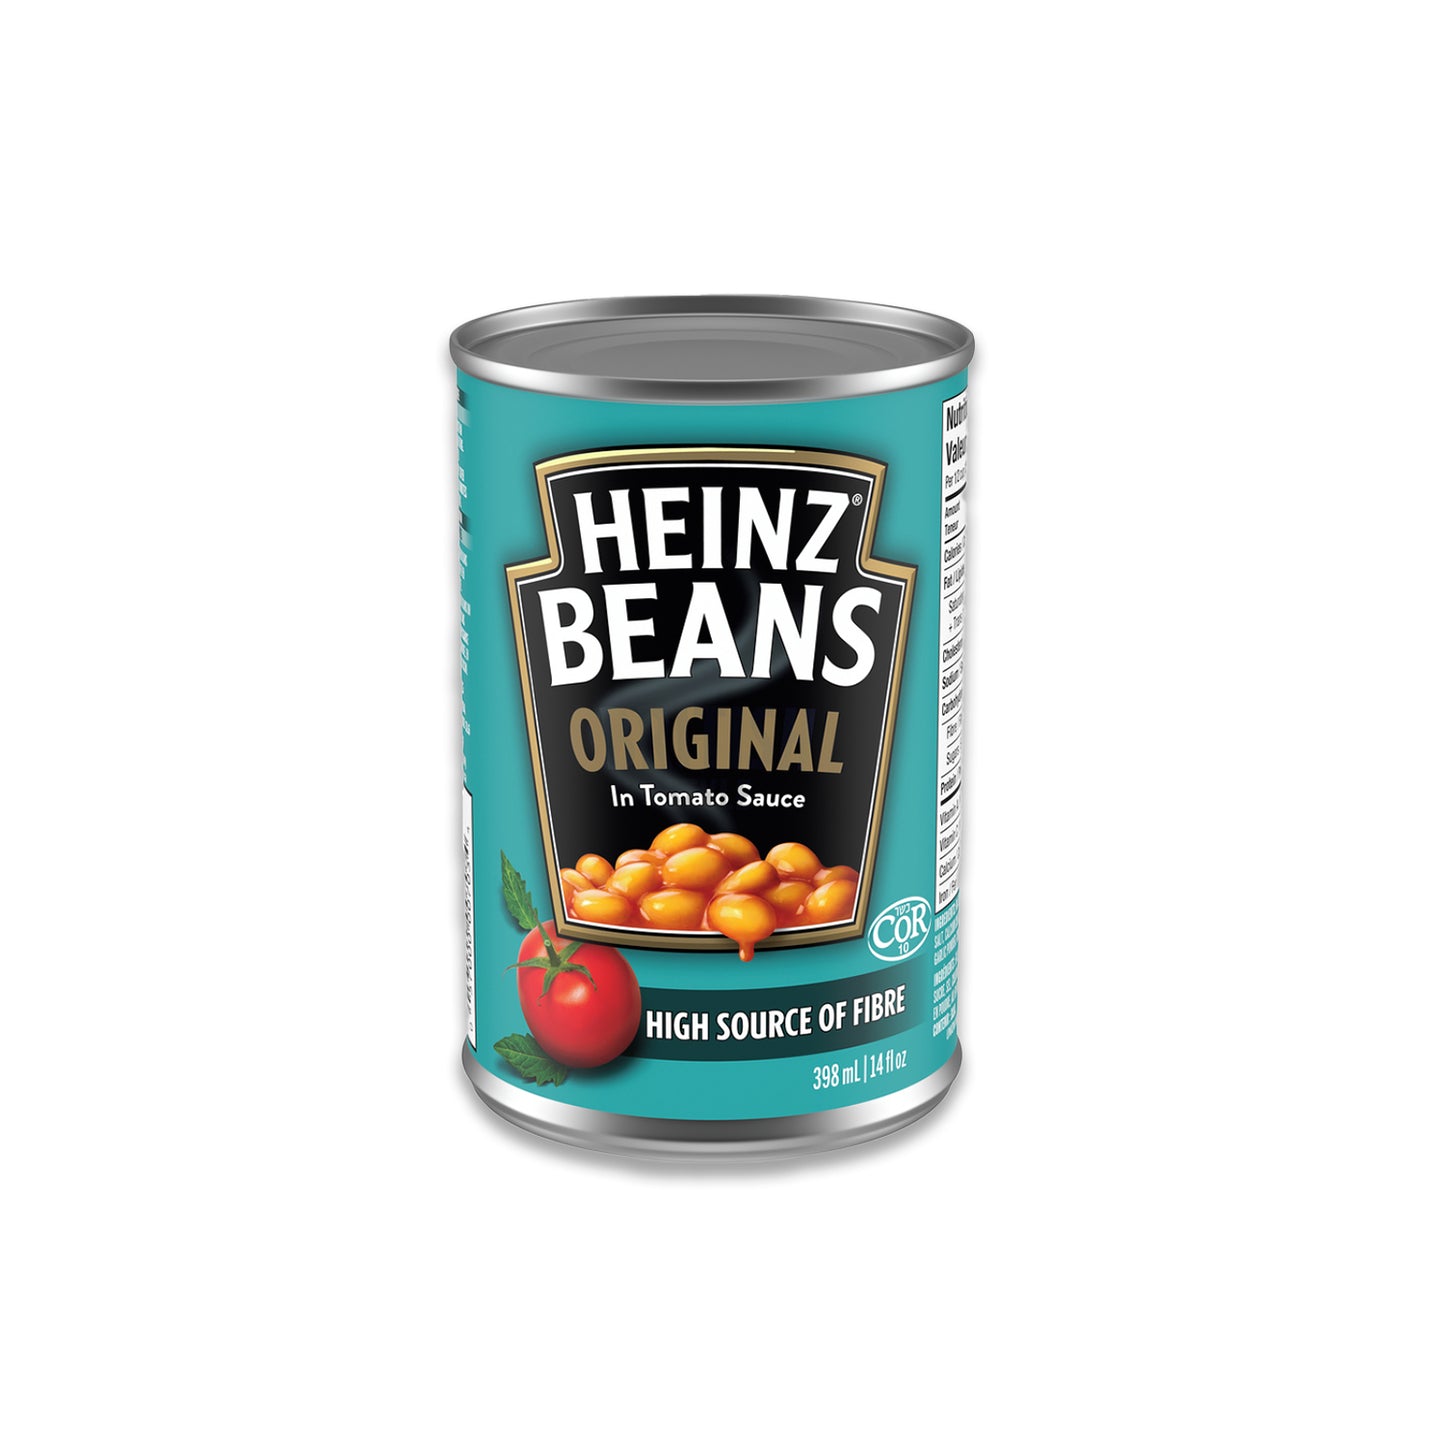 Beans - Heinz Baked Original (With Tomato Sauce)